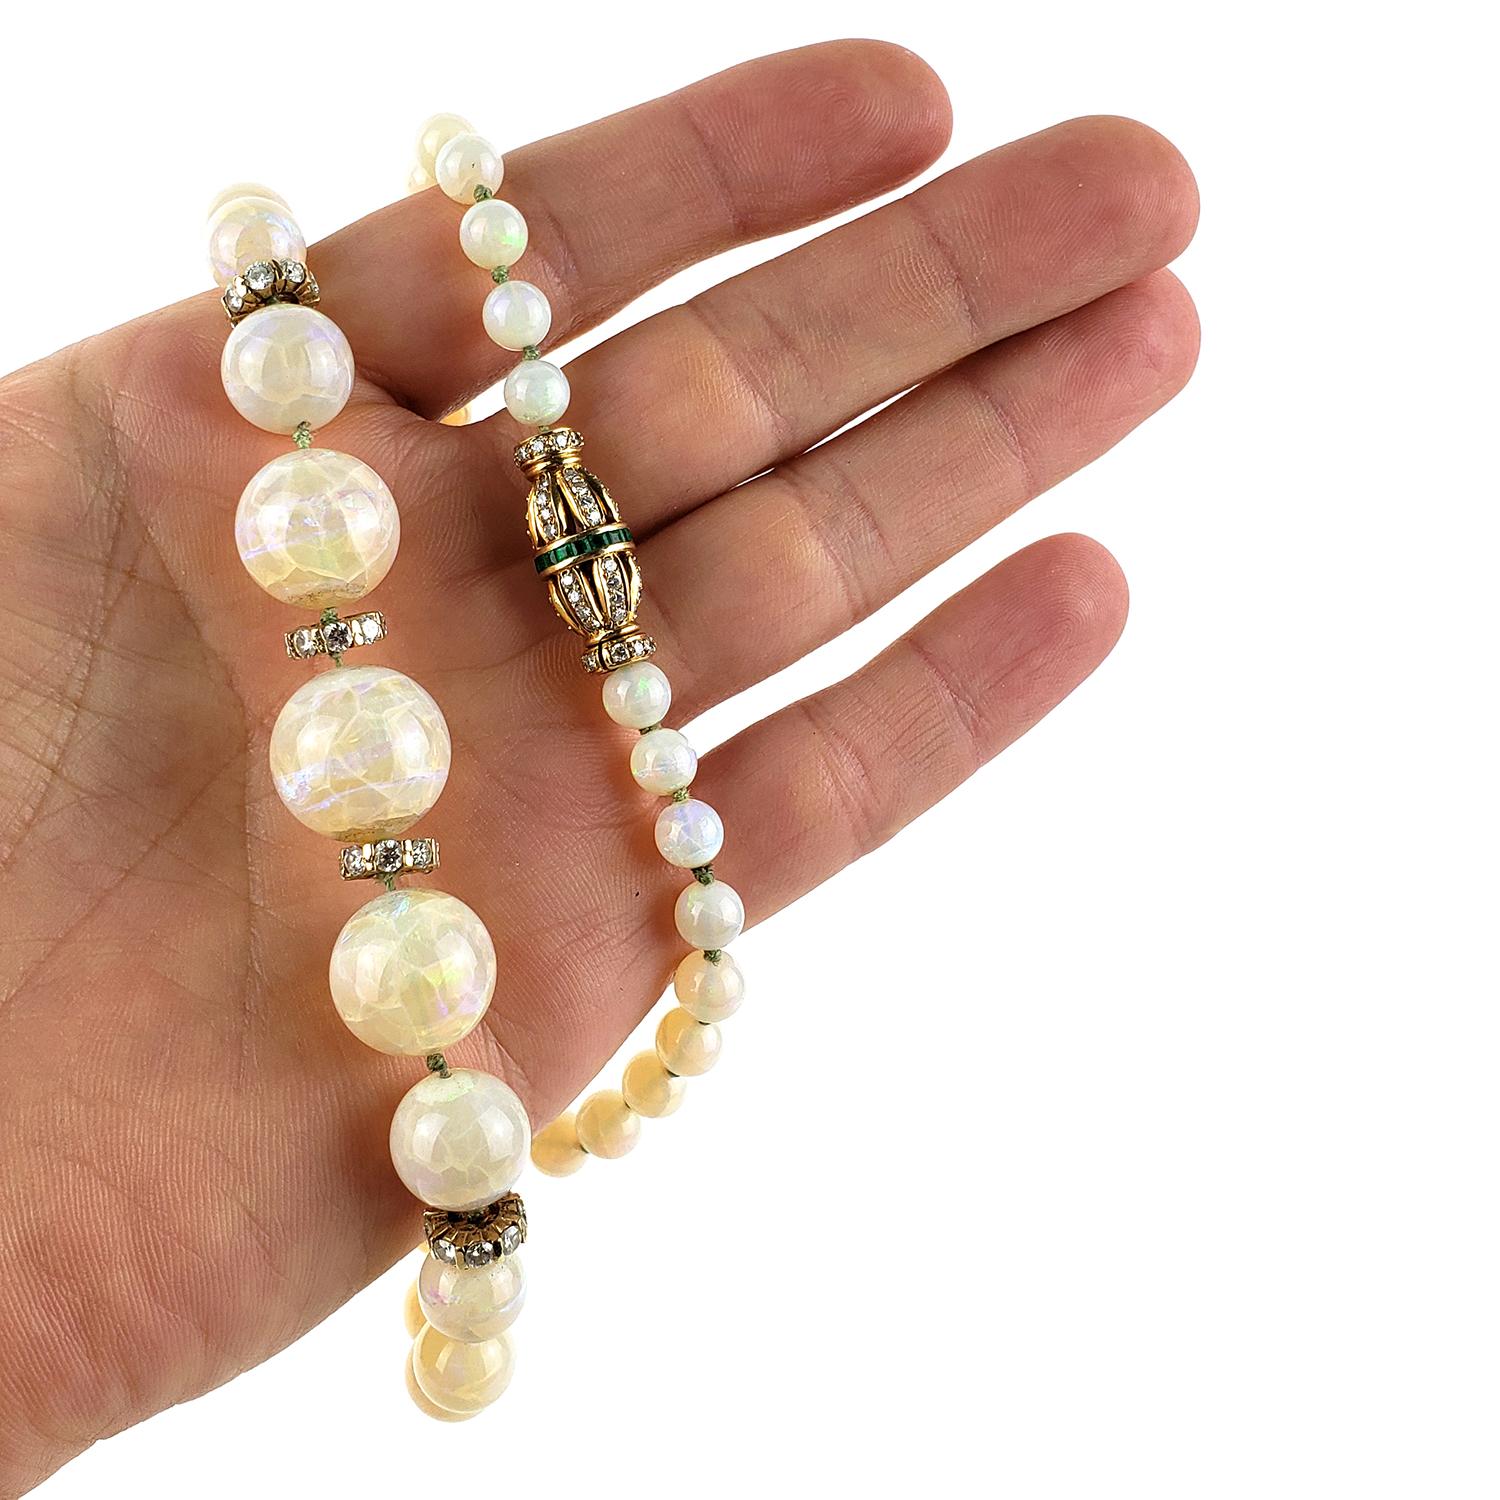 18 inch Opal necklace with round polished opals that measure from 16 mm to 6.5 mm, offset by 4 diamond roundels and beautifully connected with a 18k yellow gold clasp that contains .35cts of Columbian colored Emeralds and rbc diamonds that are clean